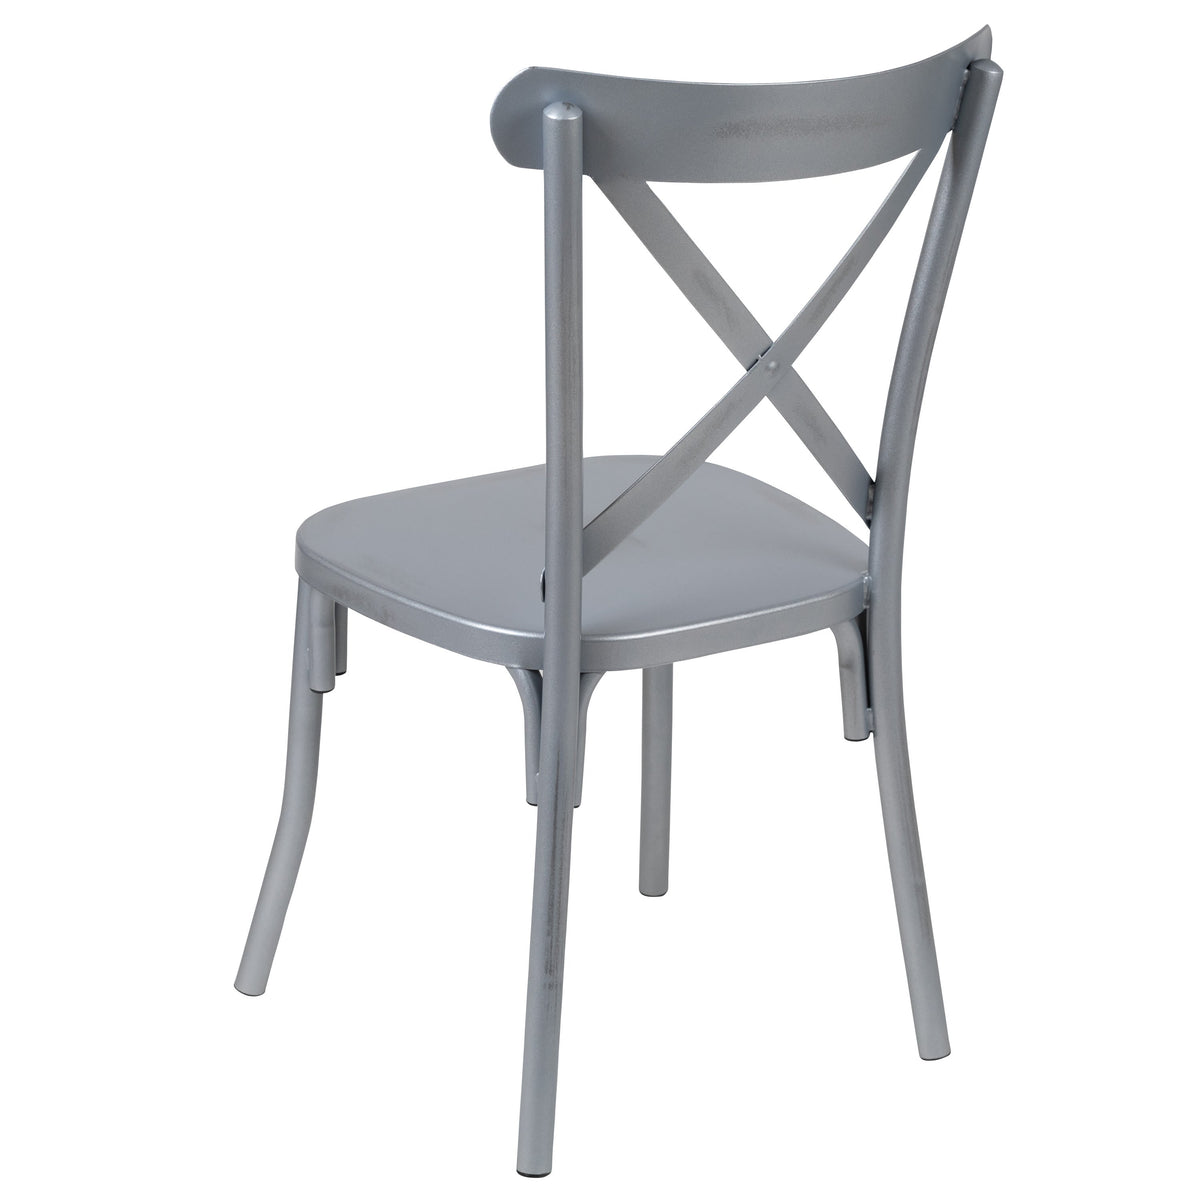 Distressed Silver |#| Metal Cross Back Dining Chair - Distressed Rustic Silver Finish-Multi-Use Chair